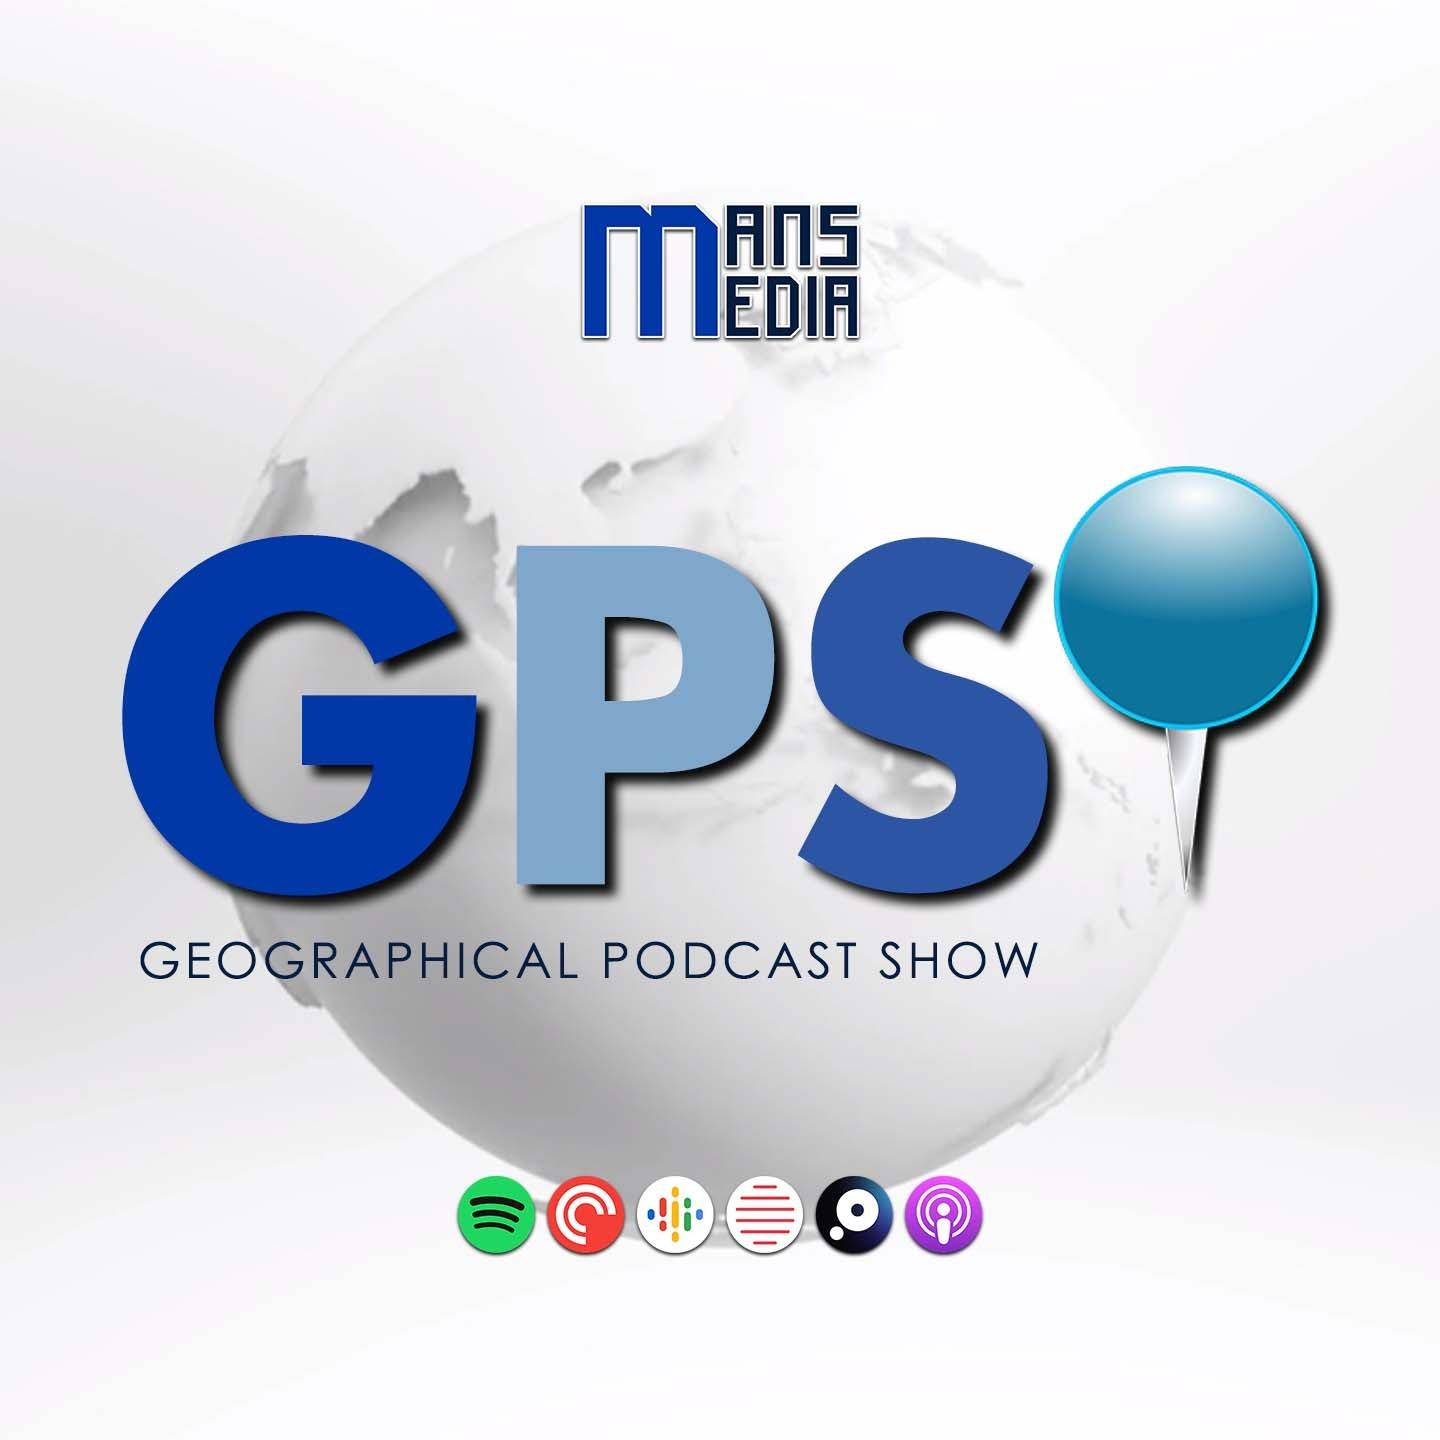 GPS (Geographical Podcast Show)